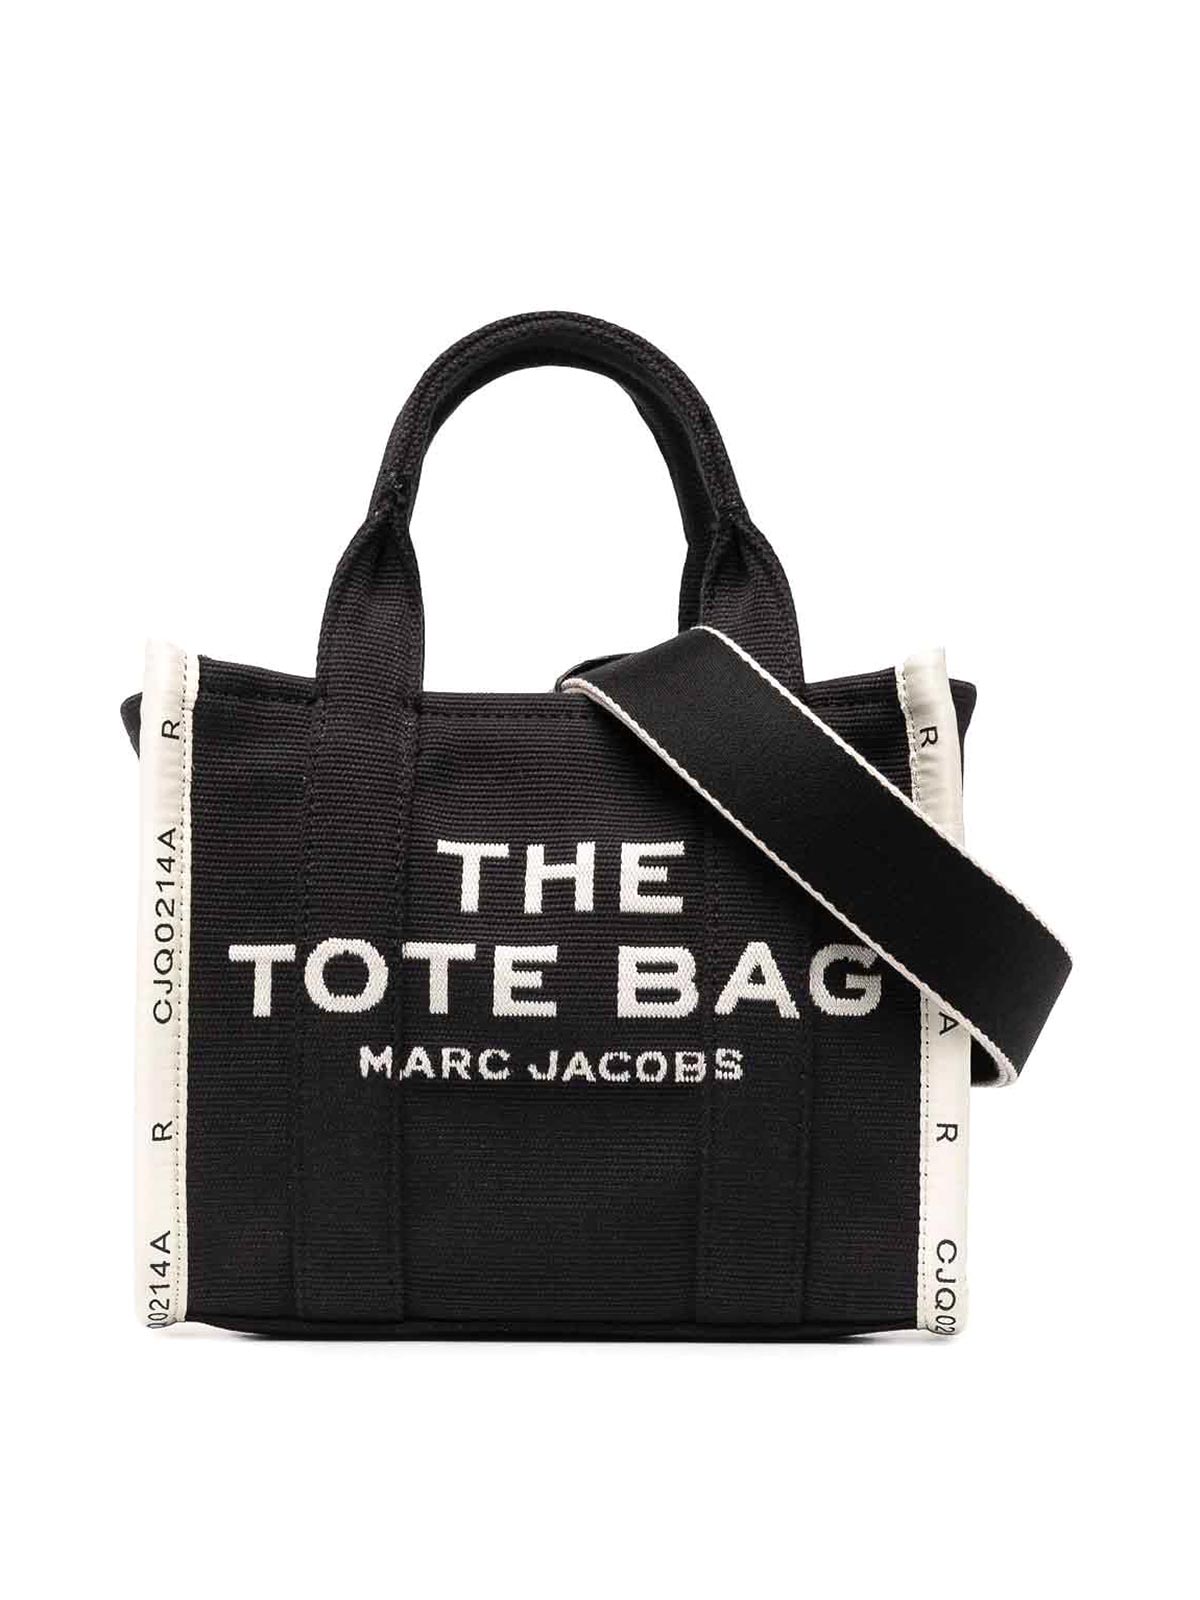 The tote small canvas tote bag by Marc Jacobs